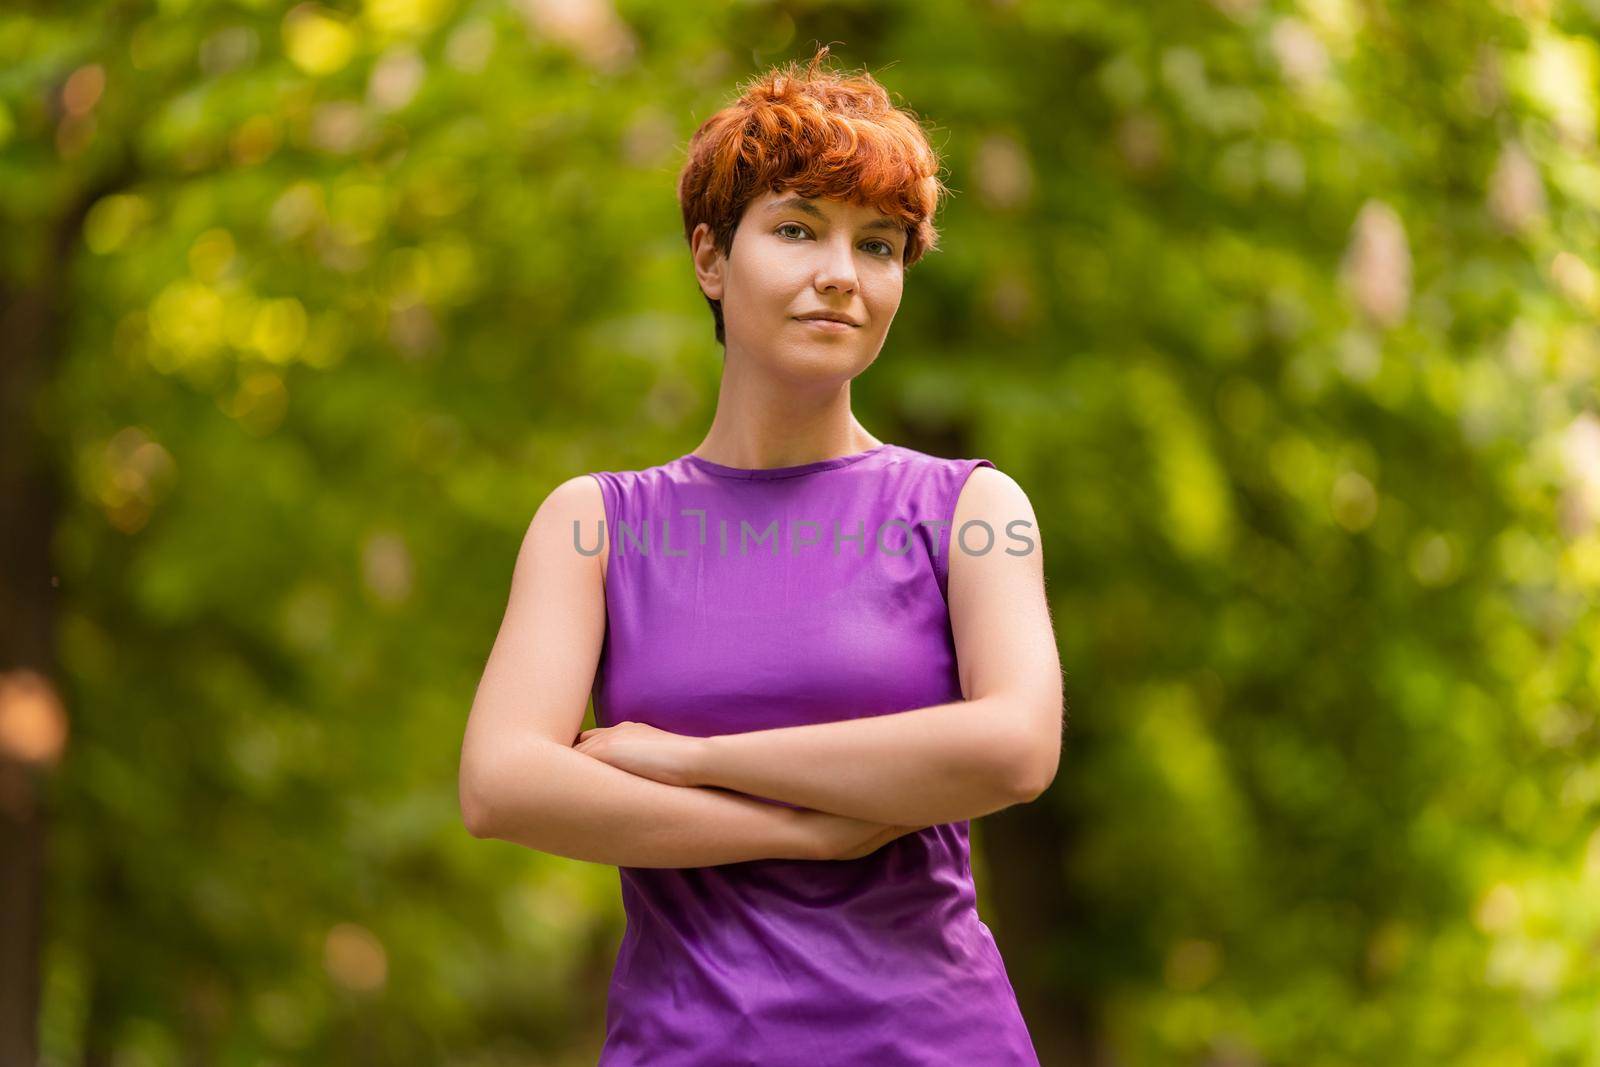 Confident person of non binary gender identity crossing arms, and looking at camera while standing on blurred background of lush trees on summer day in park